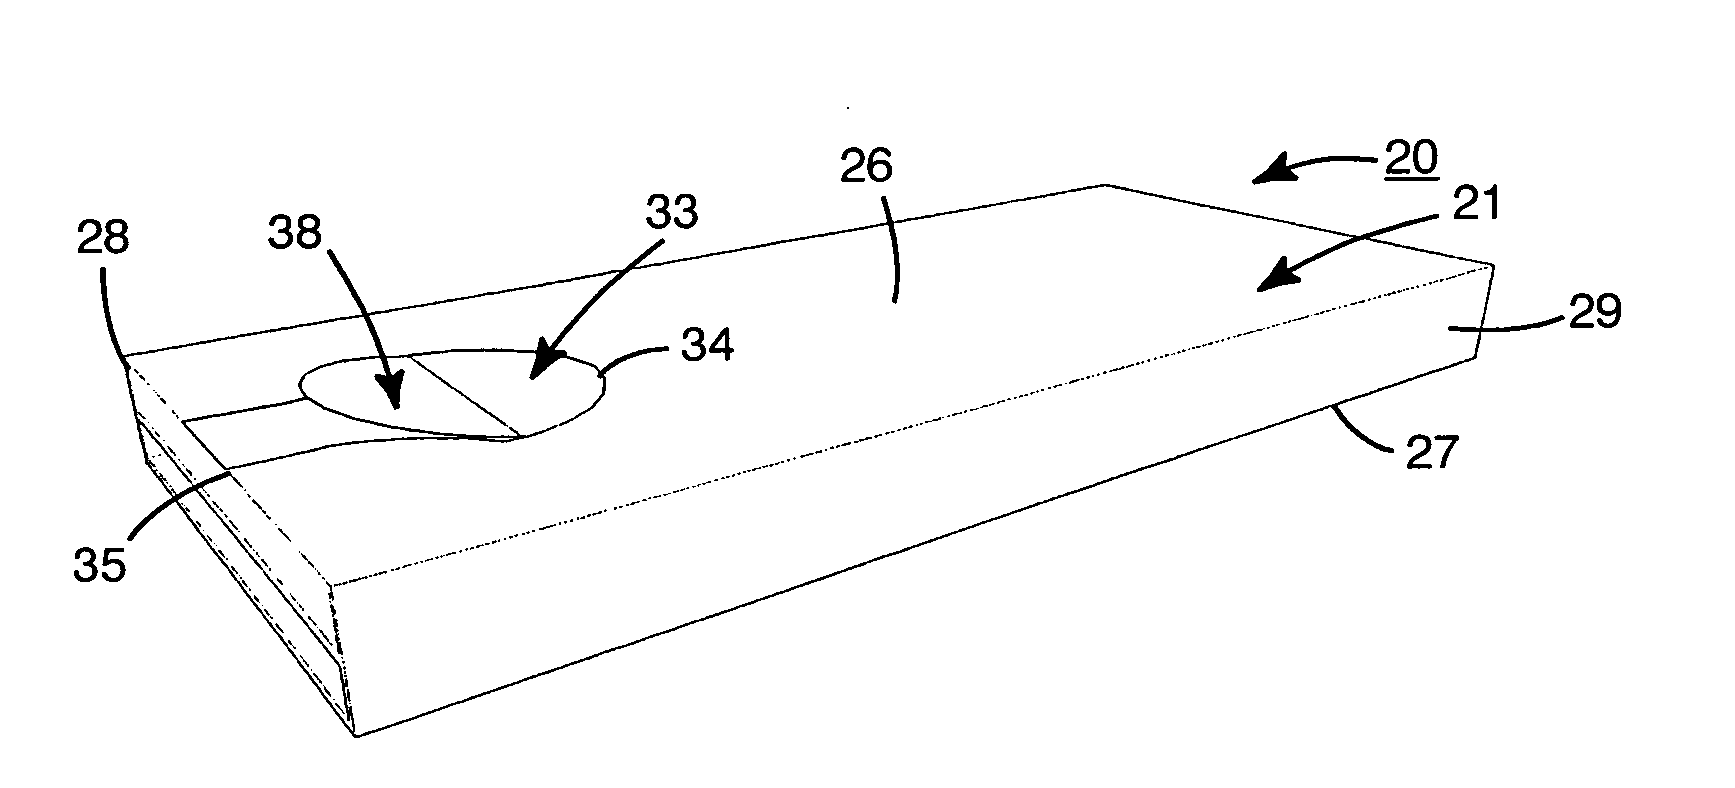 Medication holding and dispensing system